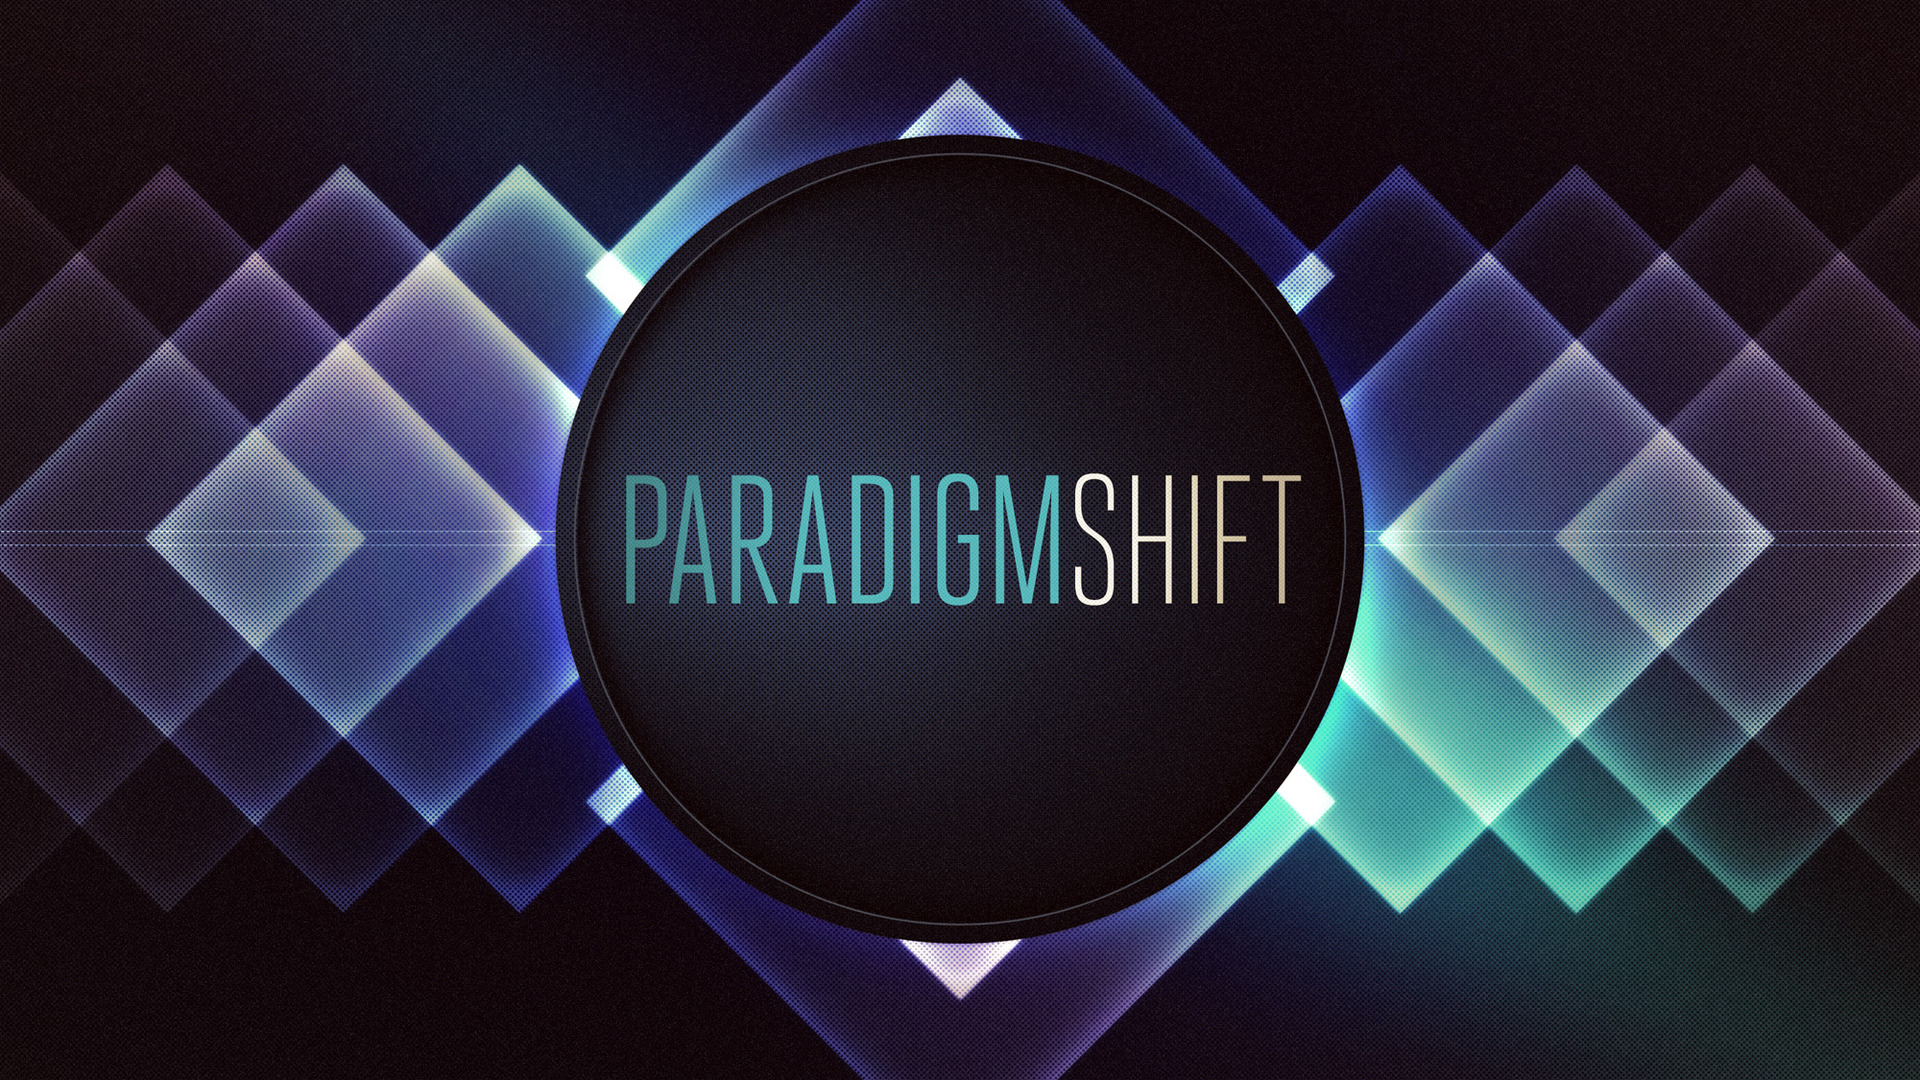 08-20-17 | Paradigm Shift | Leadership: The Wilderness and The Promise | Mark Anderson